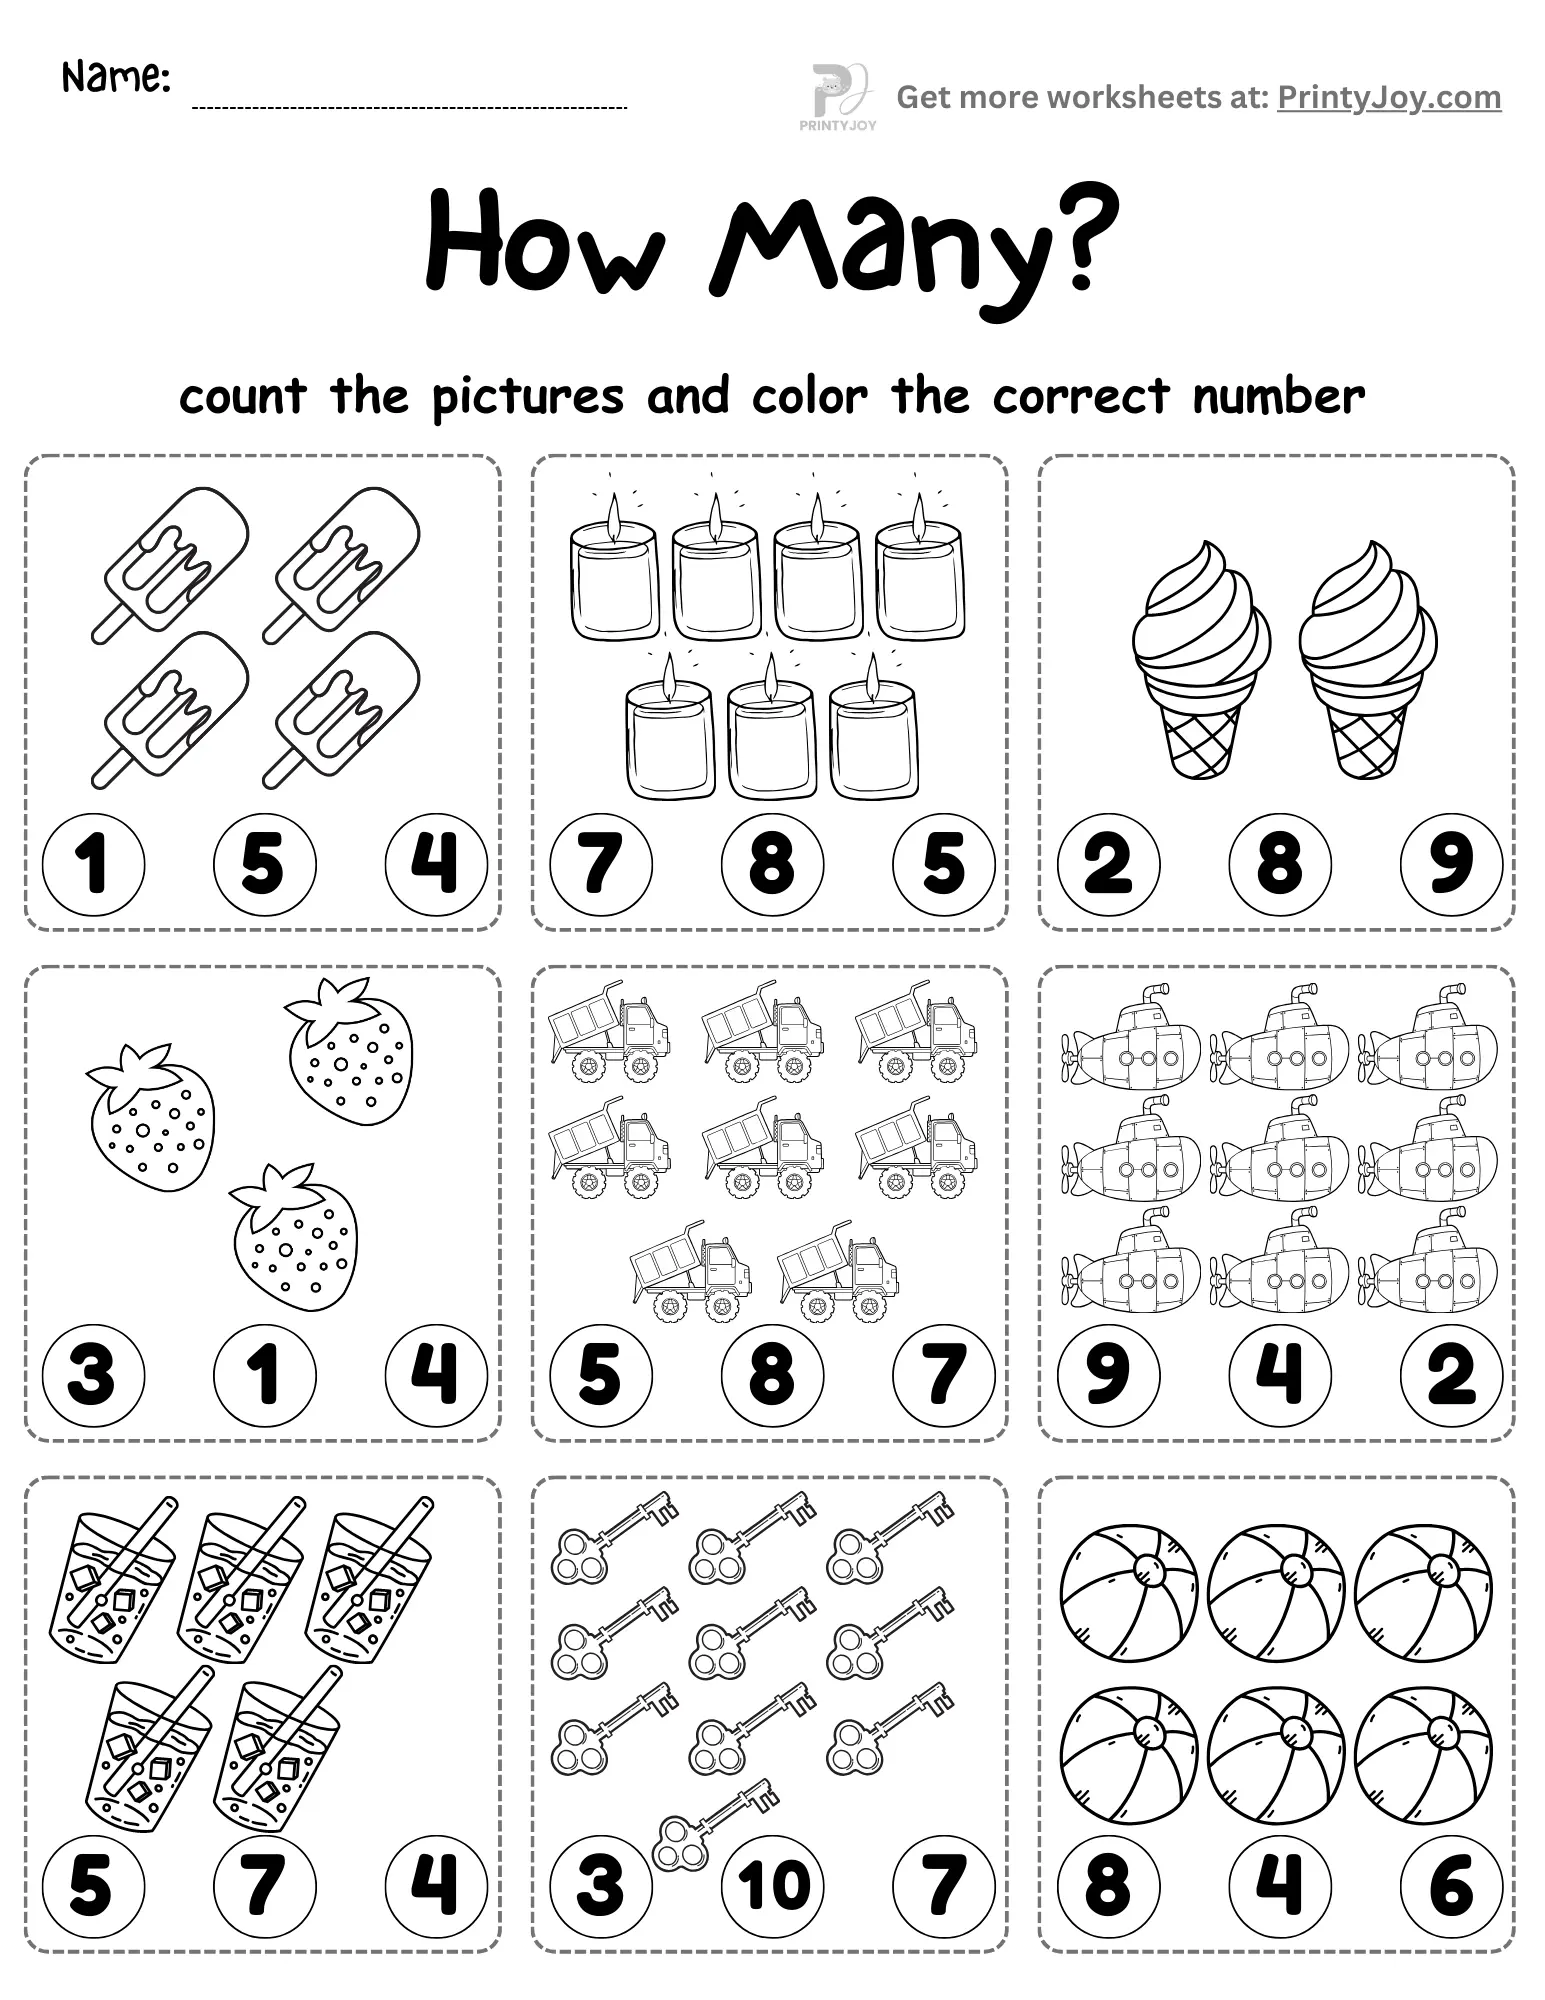 Counting Objects Worksheets 1-20 Free